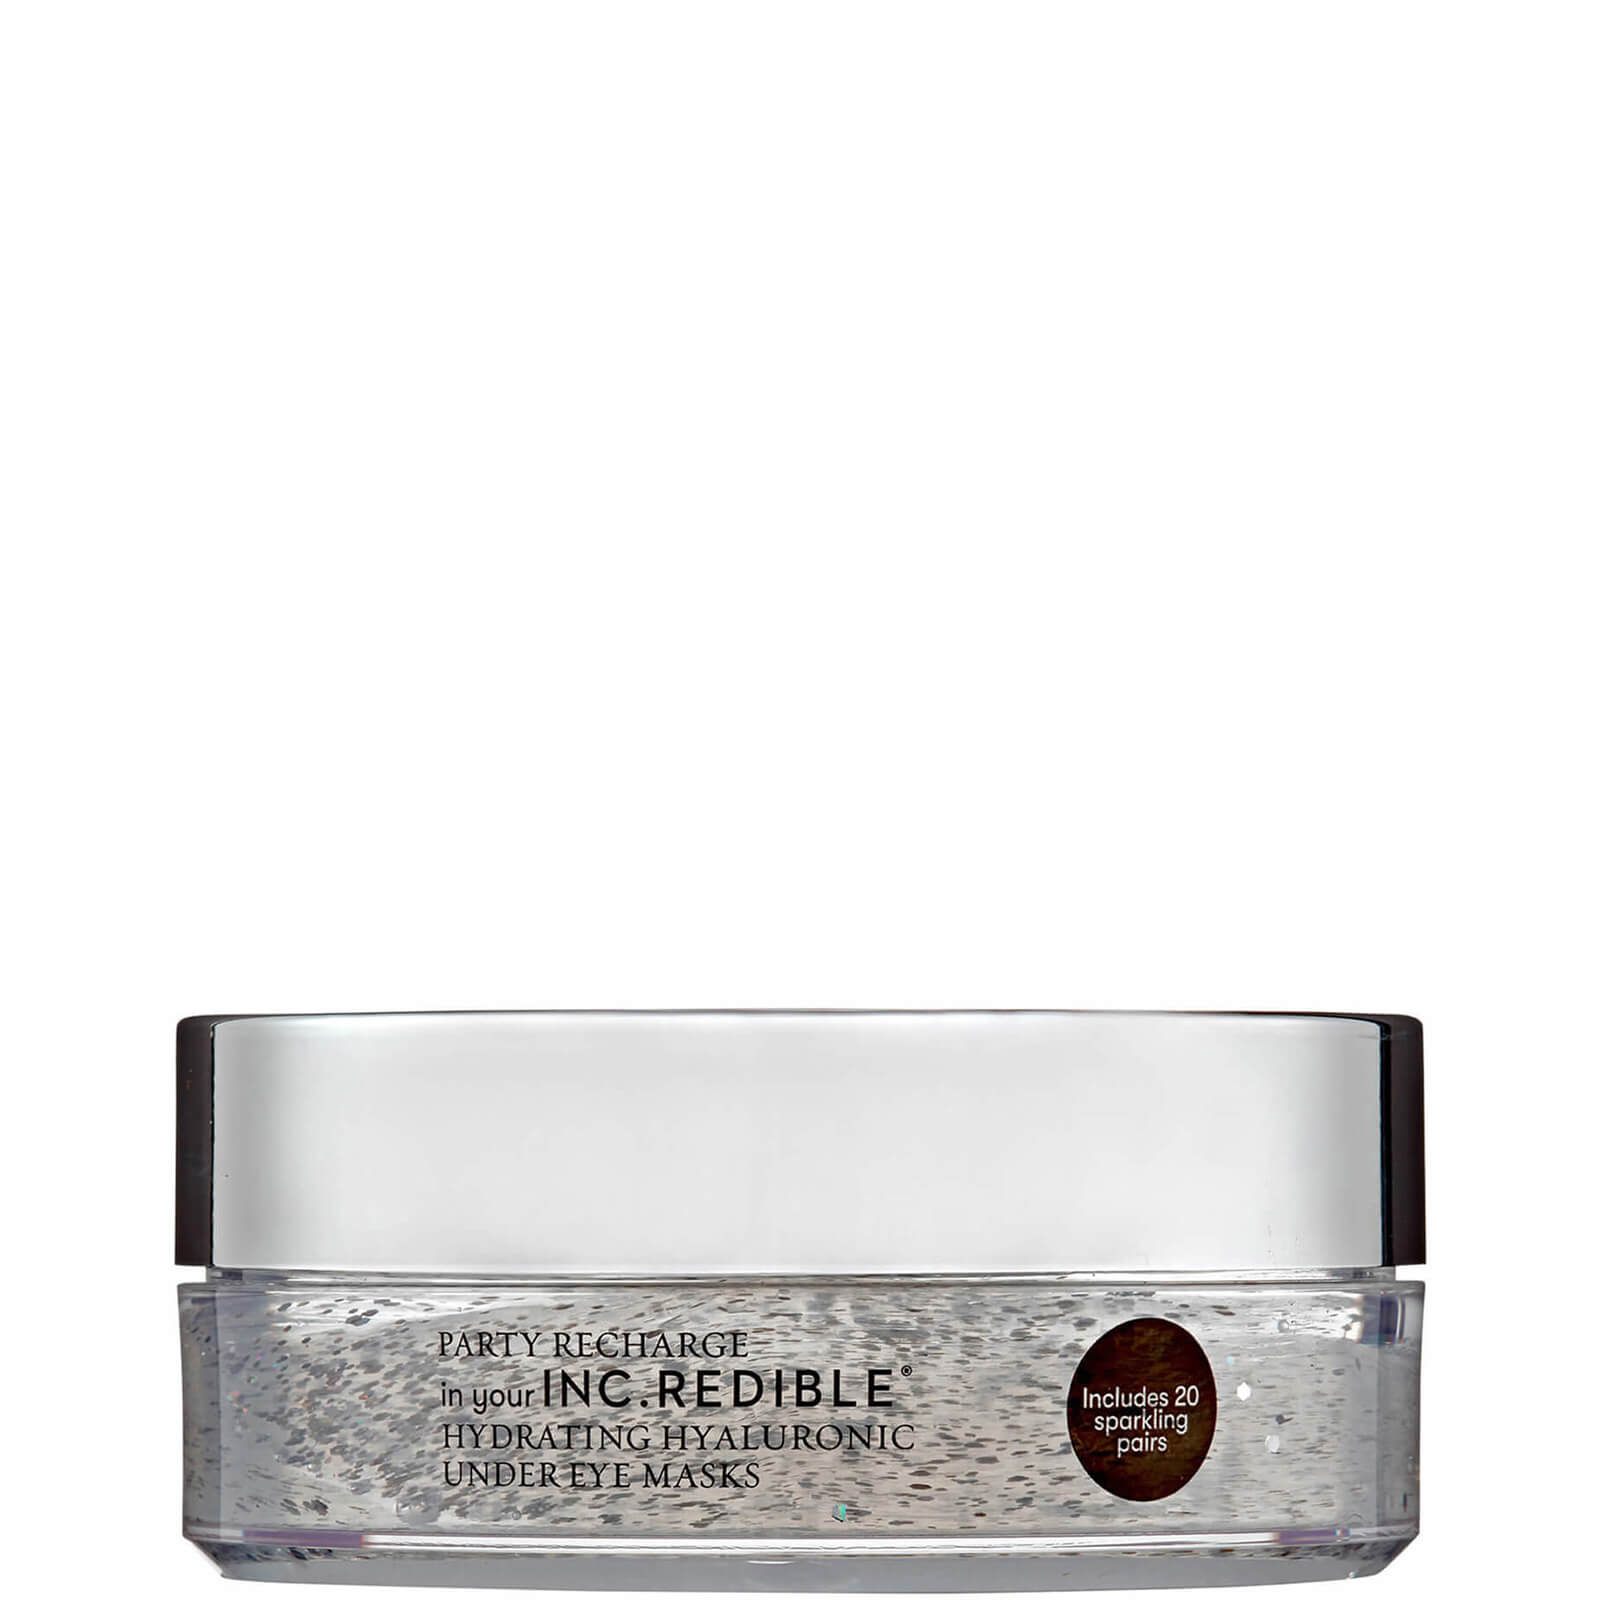 INC.redible Party Recharge Sparkling Under Eye Masks 120g